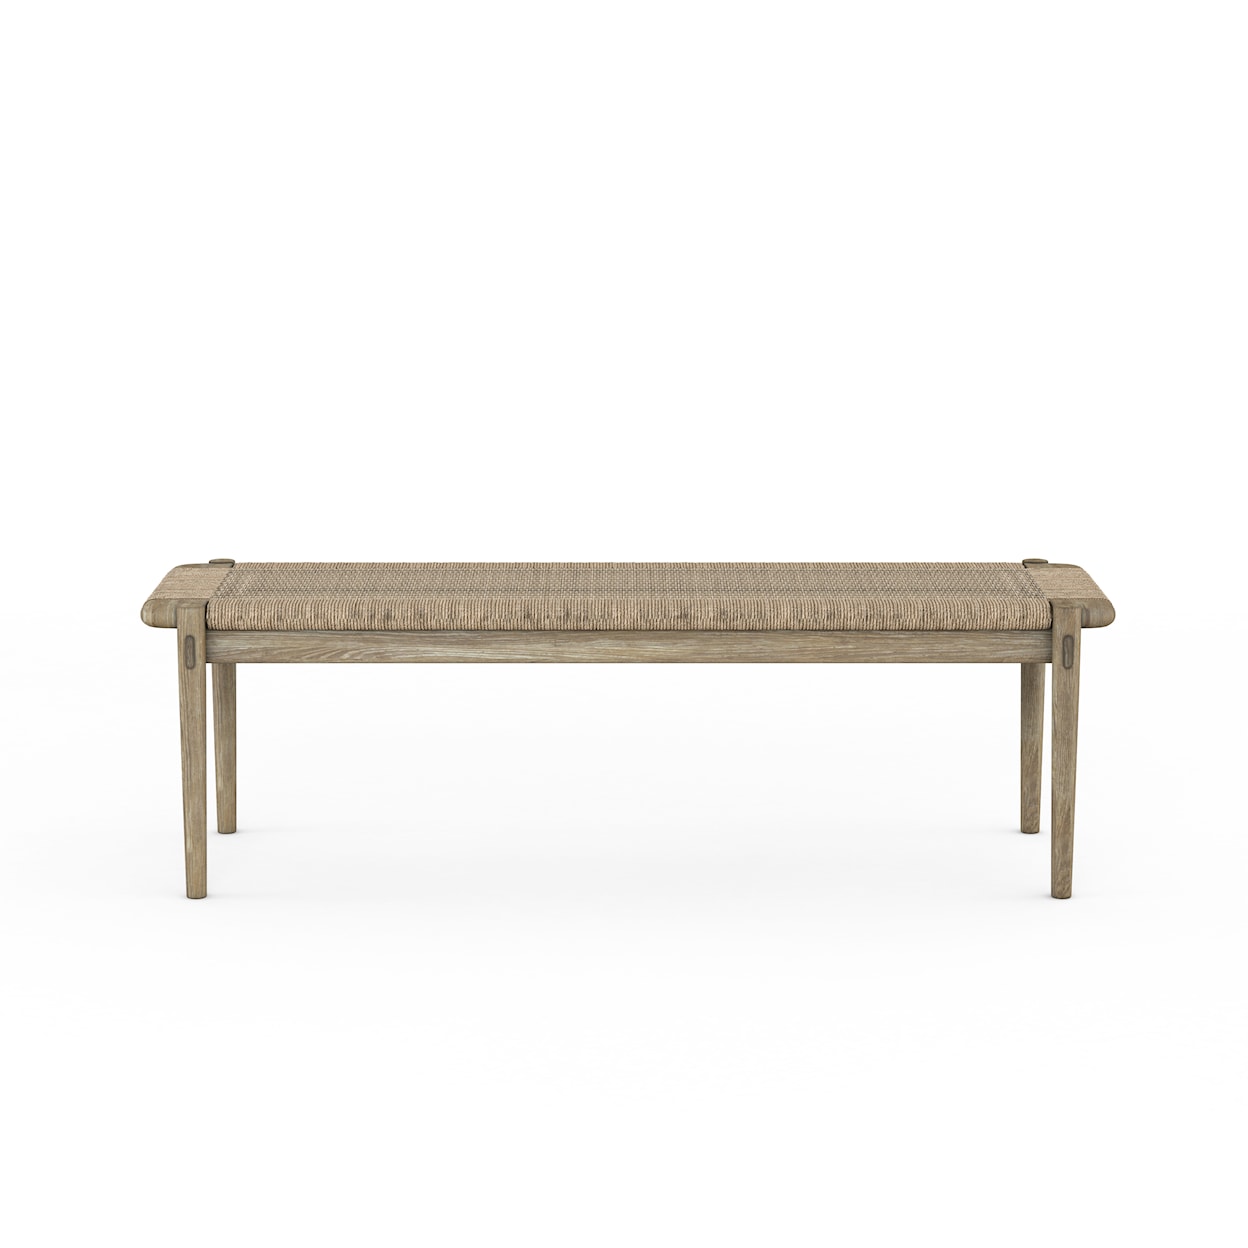 A.R.T. Furniture Inc Frame Accent Bench